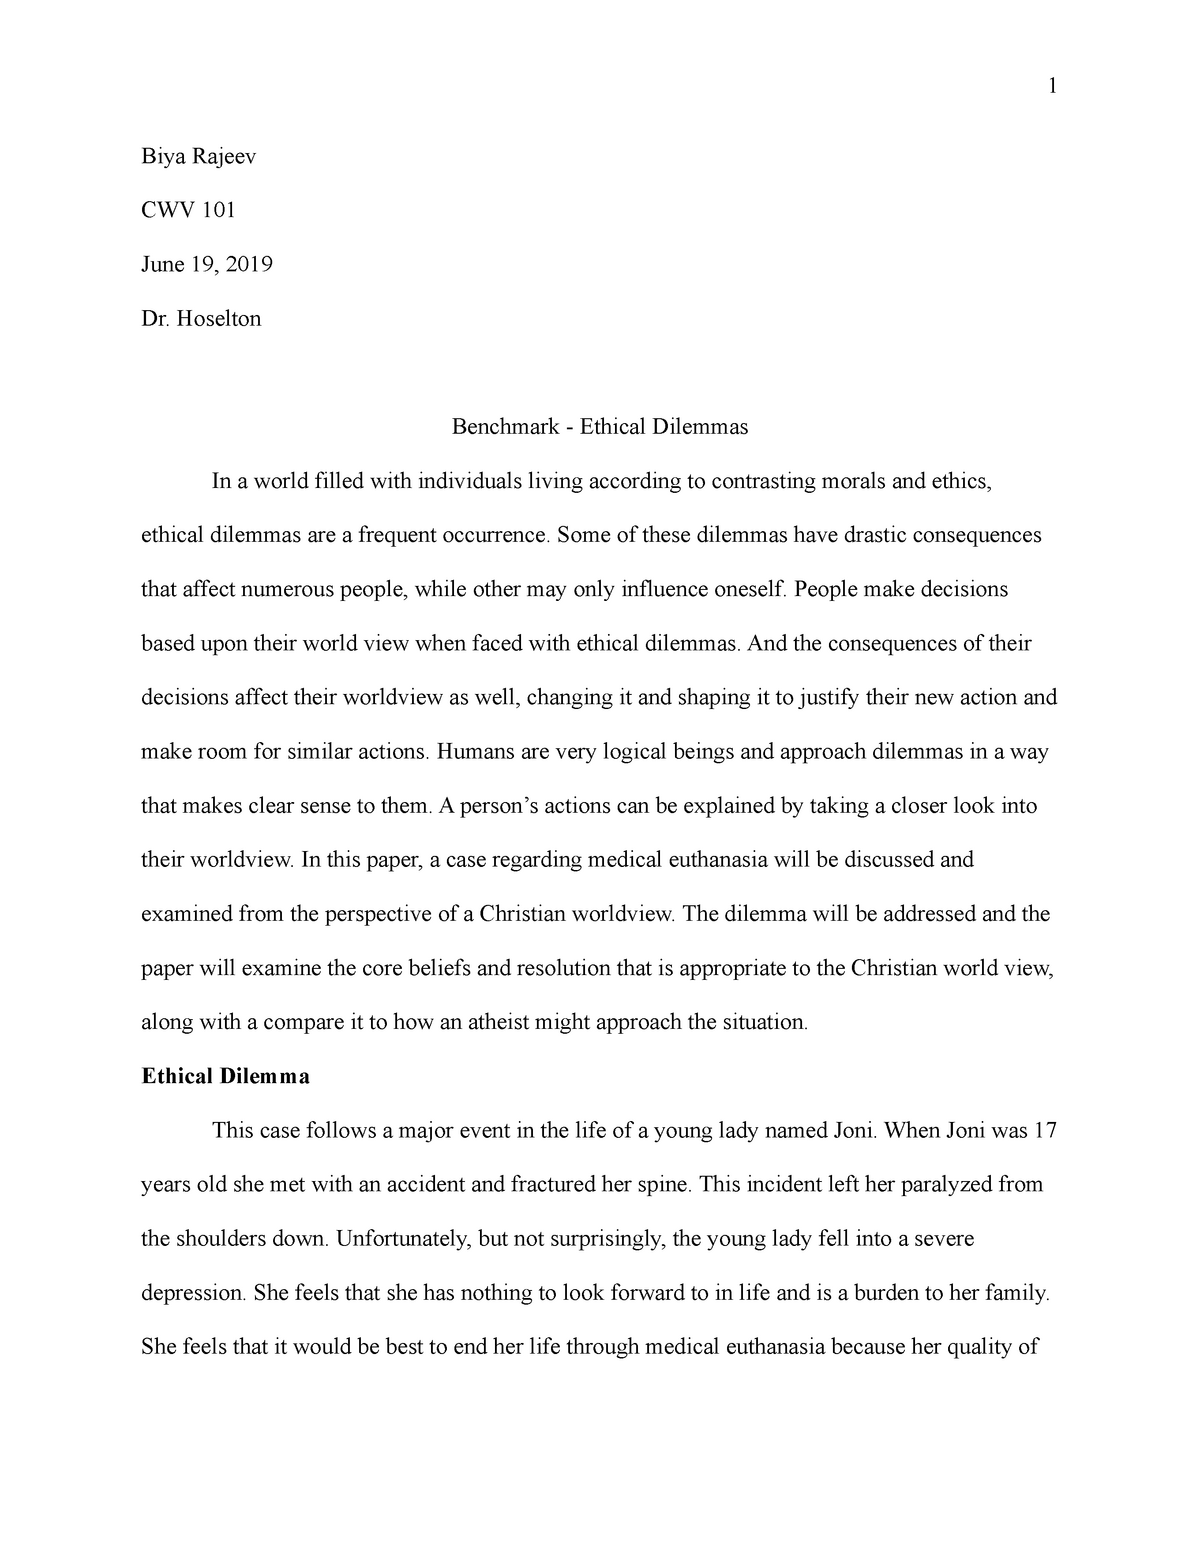 how to write a research paper on ethical dilemma